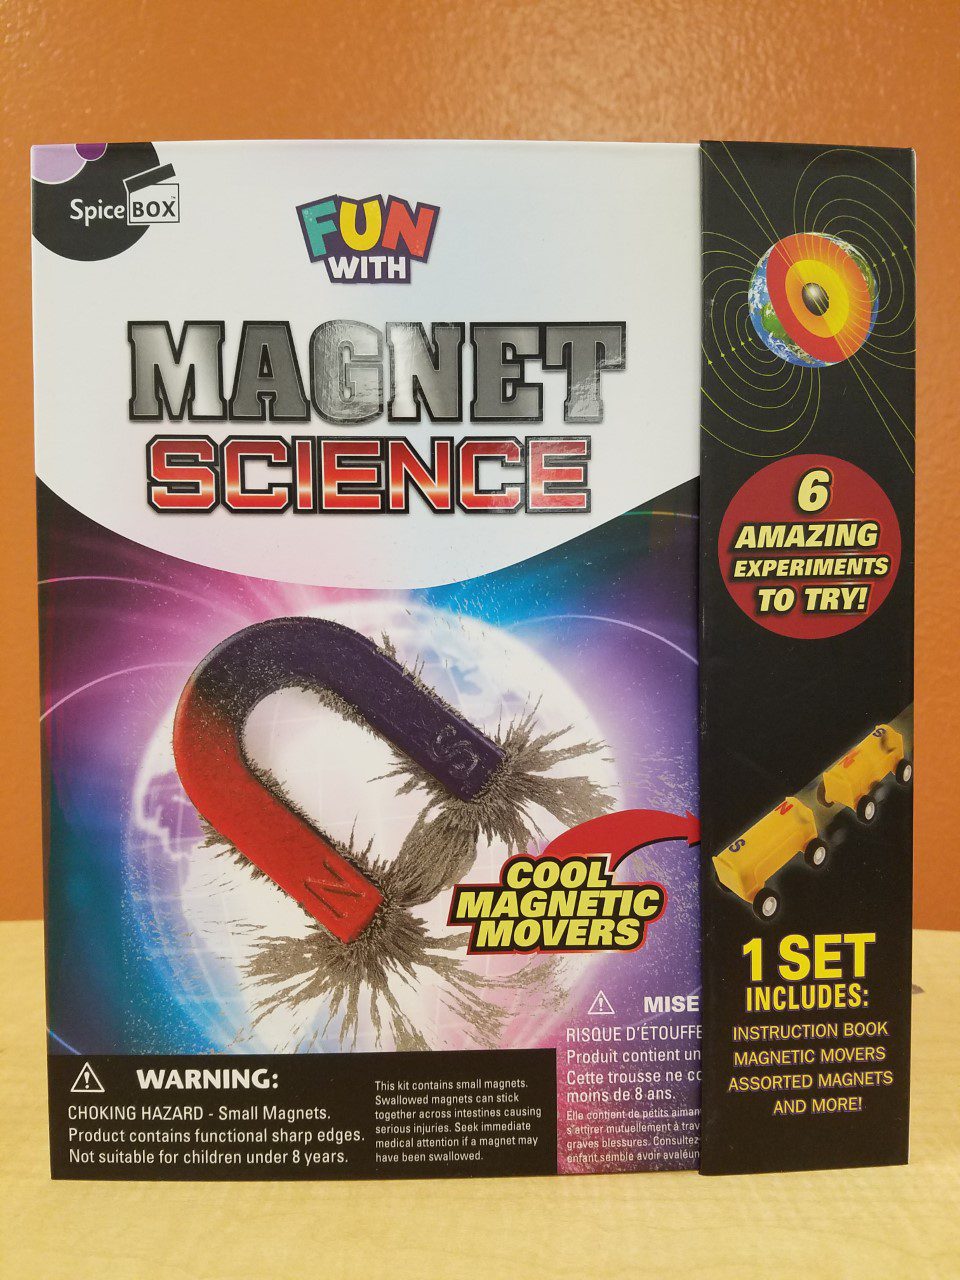 Fun With Magnet Science, Spice Box